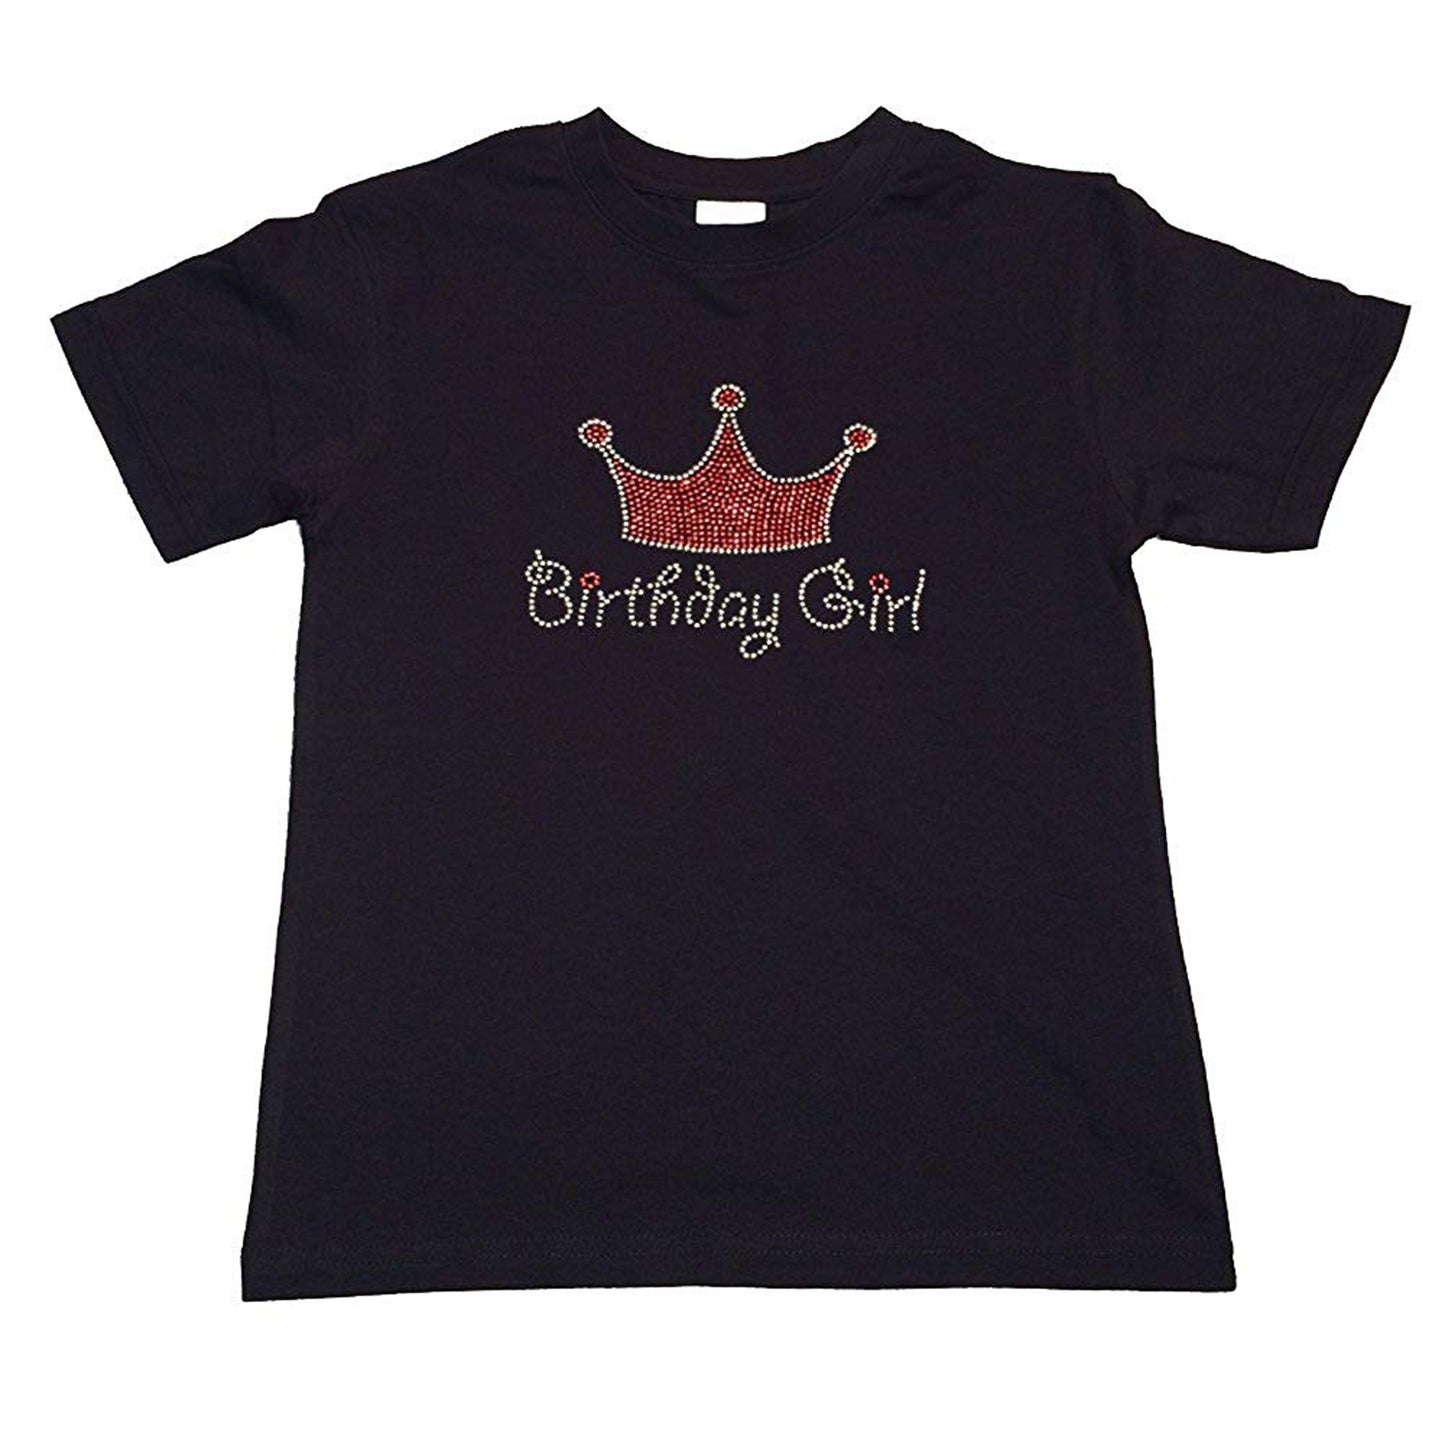 Girls Rhinestone T-Shirt " Pink Birthday Girl Crown " Size 3 to 14 Available